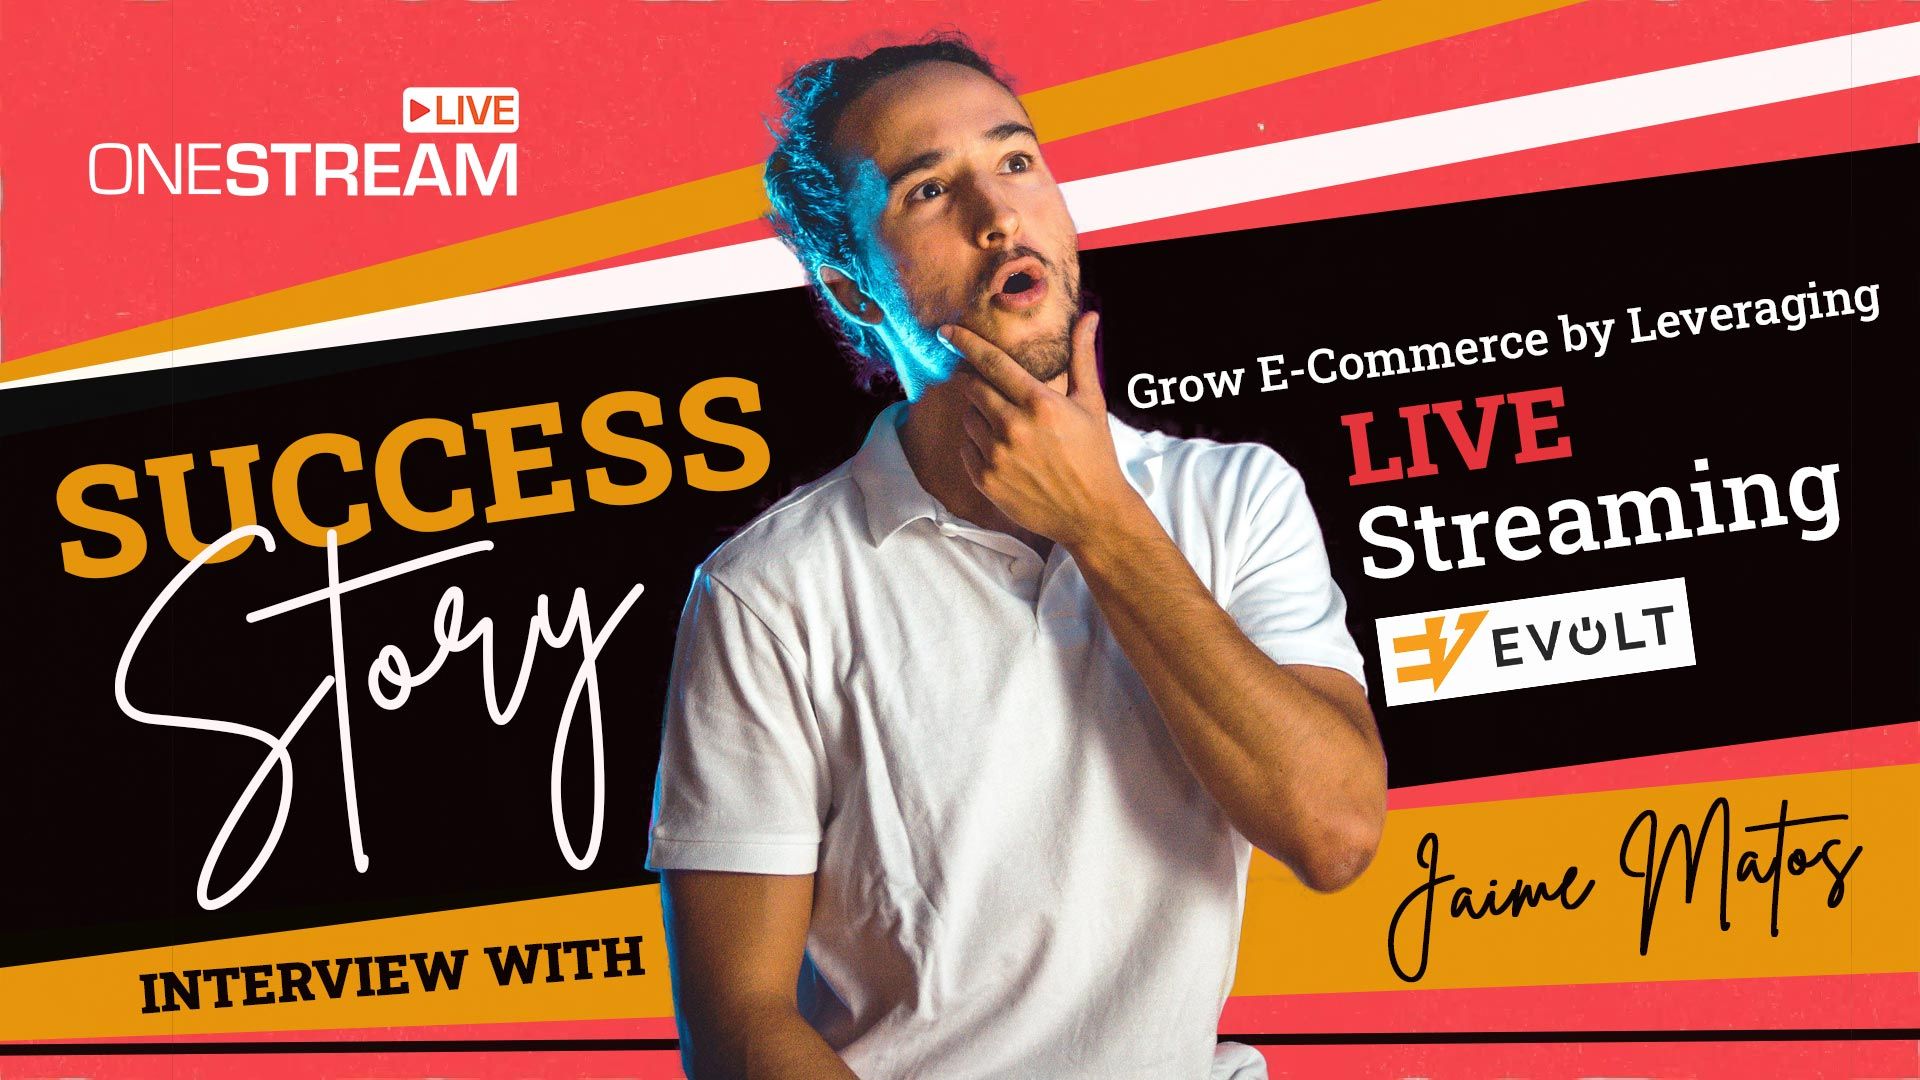 OneStream Live Success Story: Growing E-Commerce by Leveraging Live Streaming - Lessons from Evolt